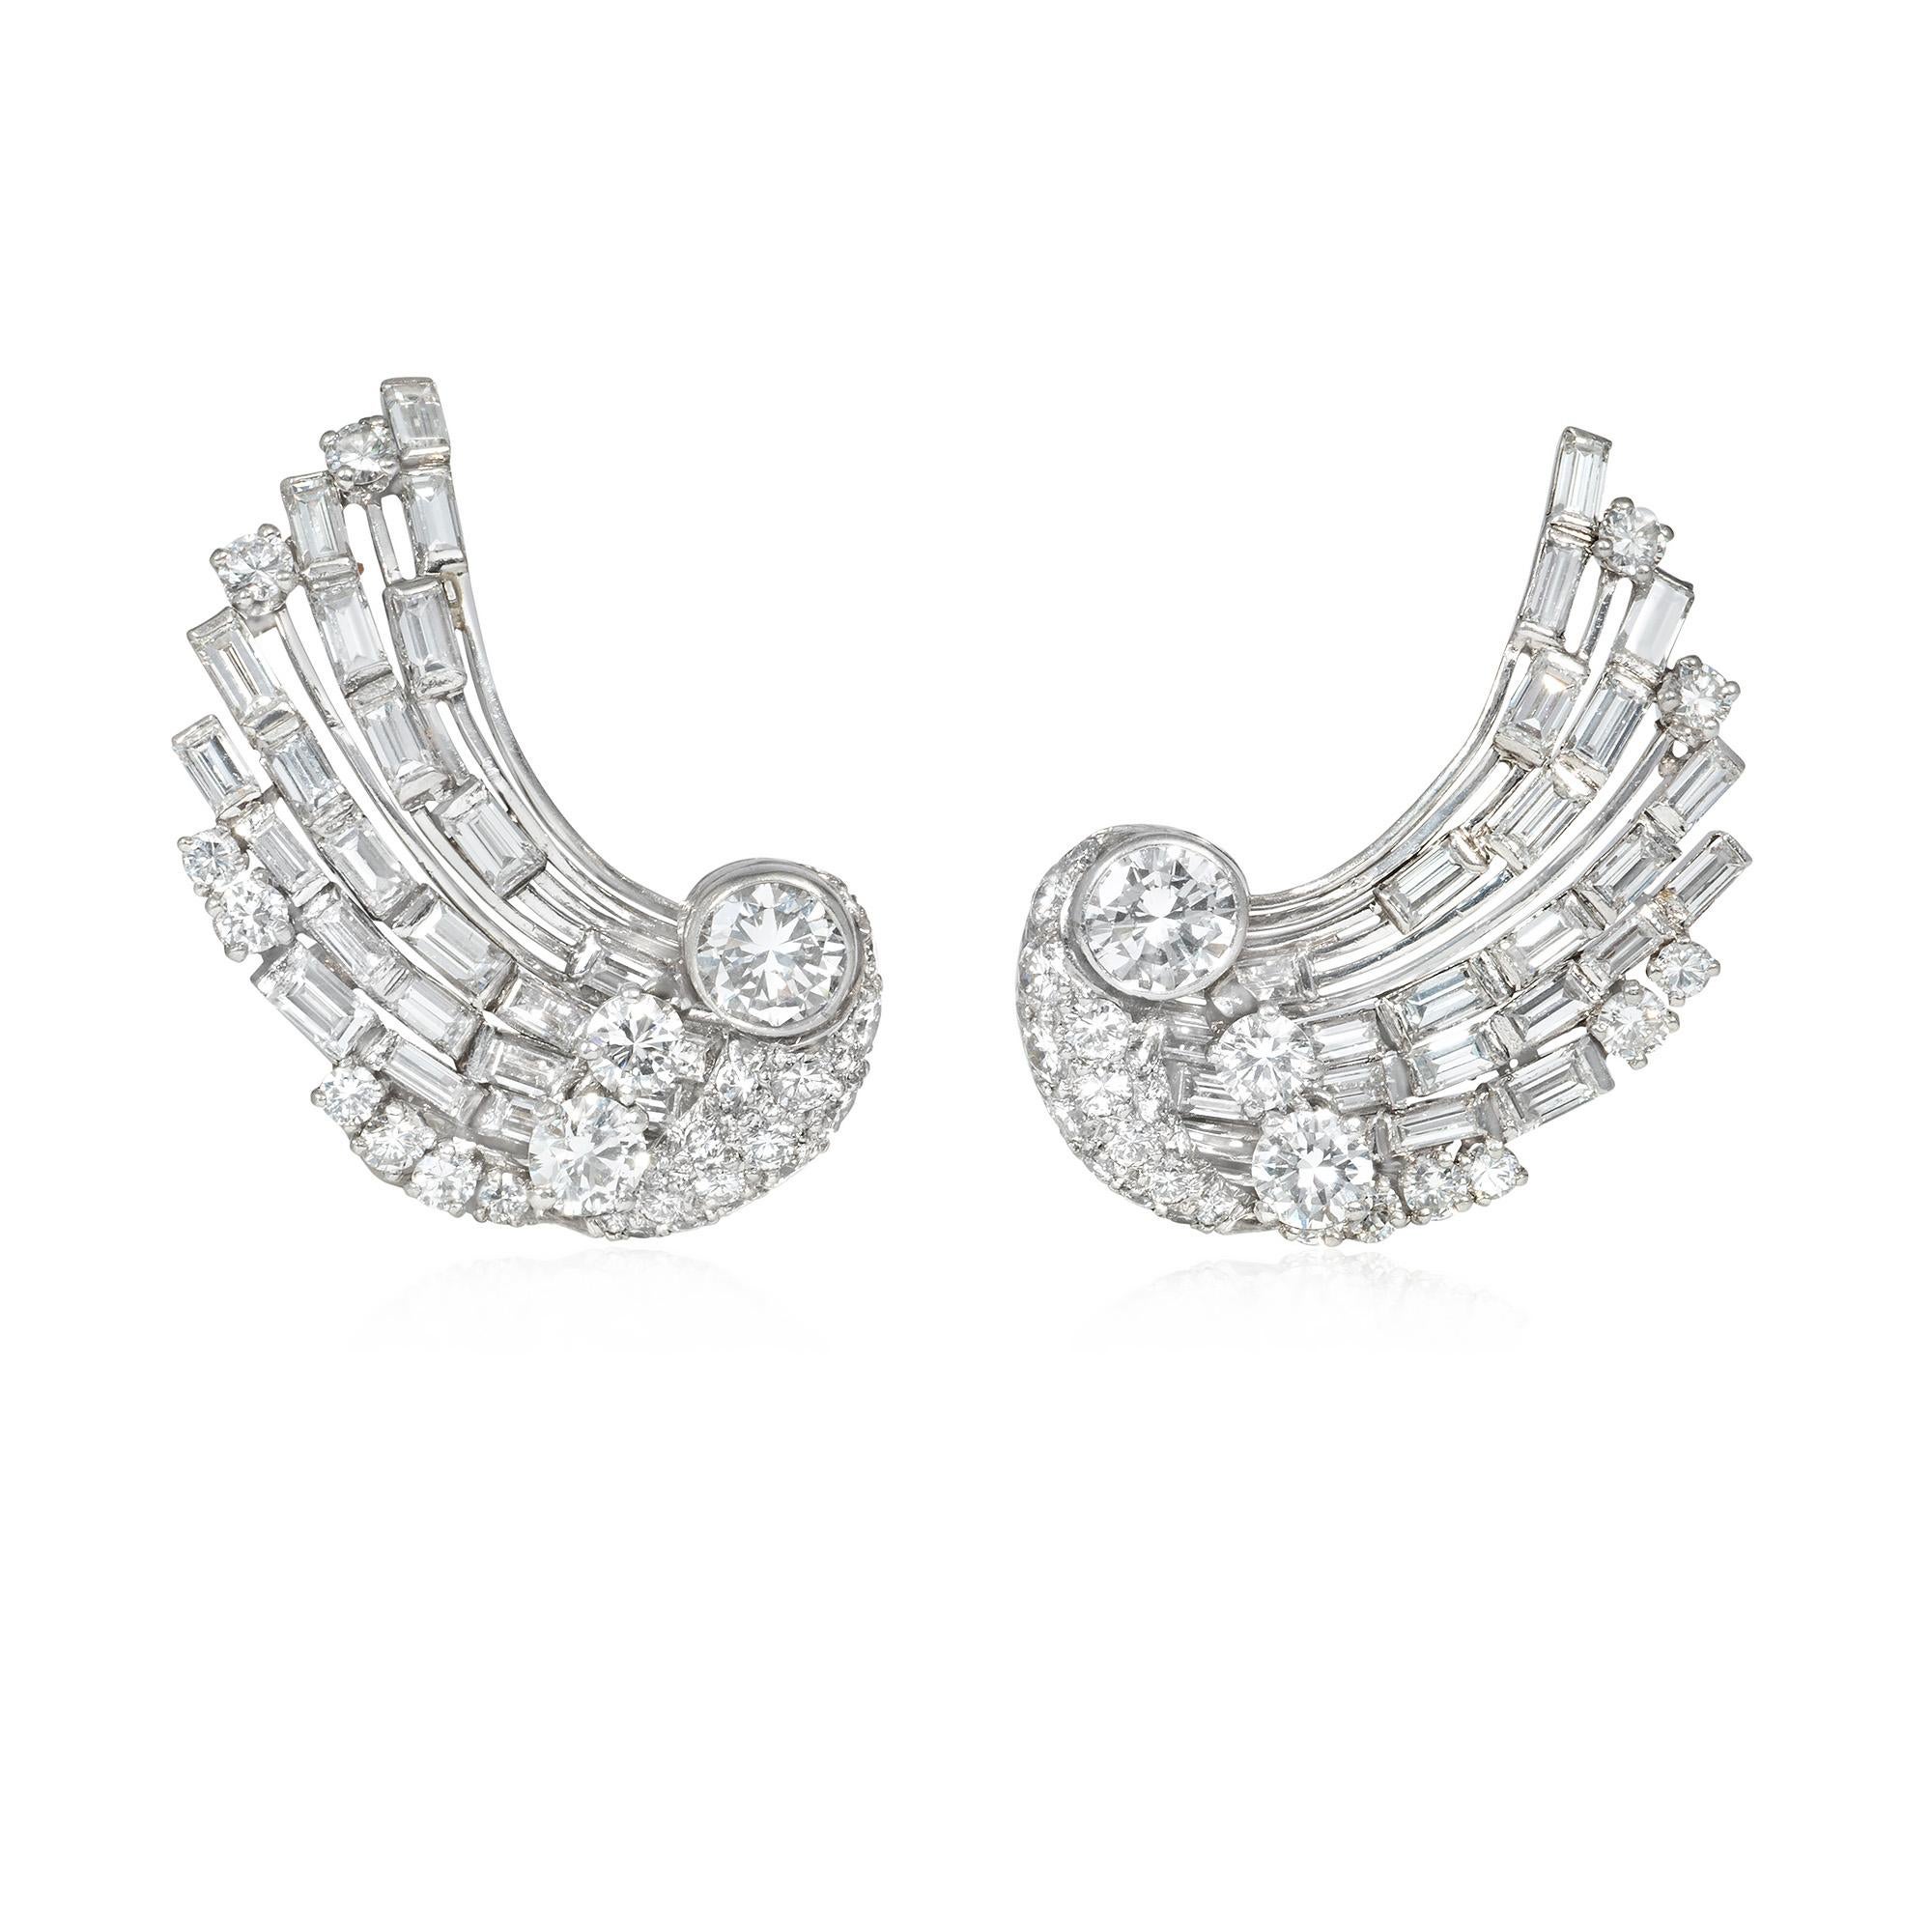 Retro Diamond and Platinum Stylized Wing Earrings with Removable Pendants In Good Condition For Sale In New York, NY